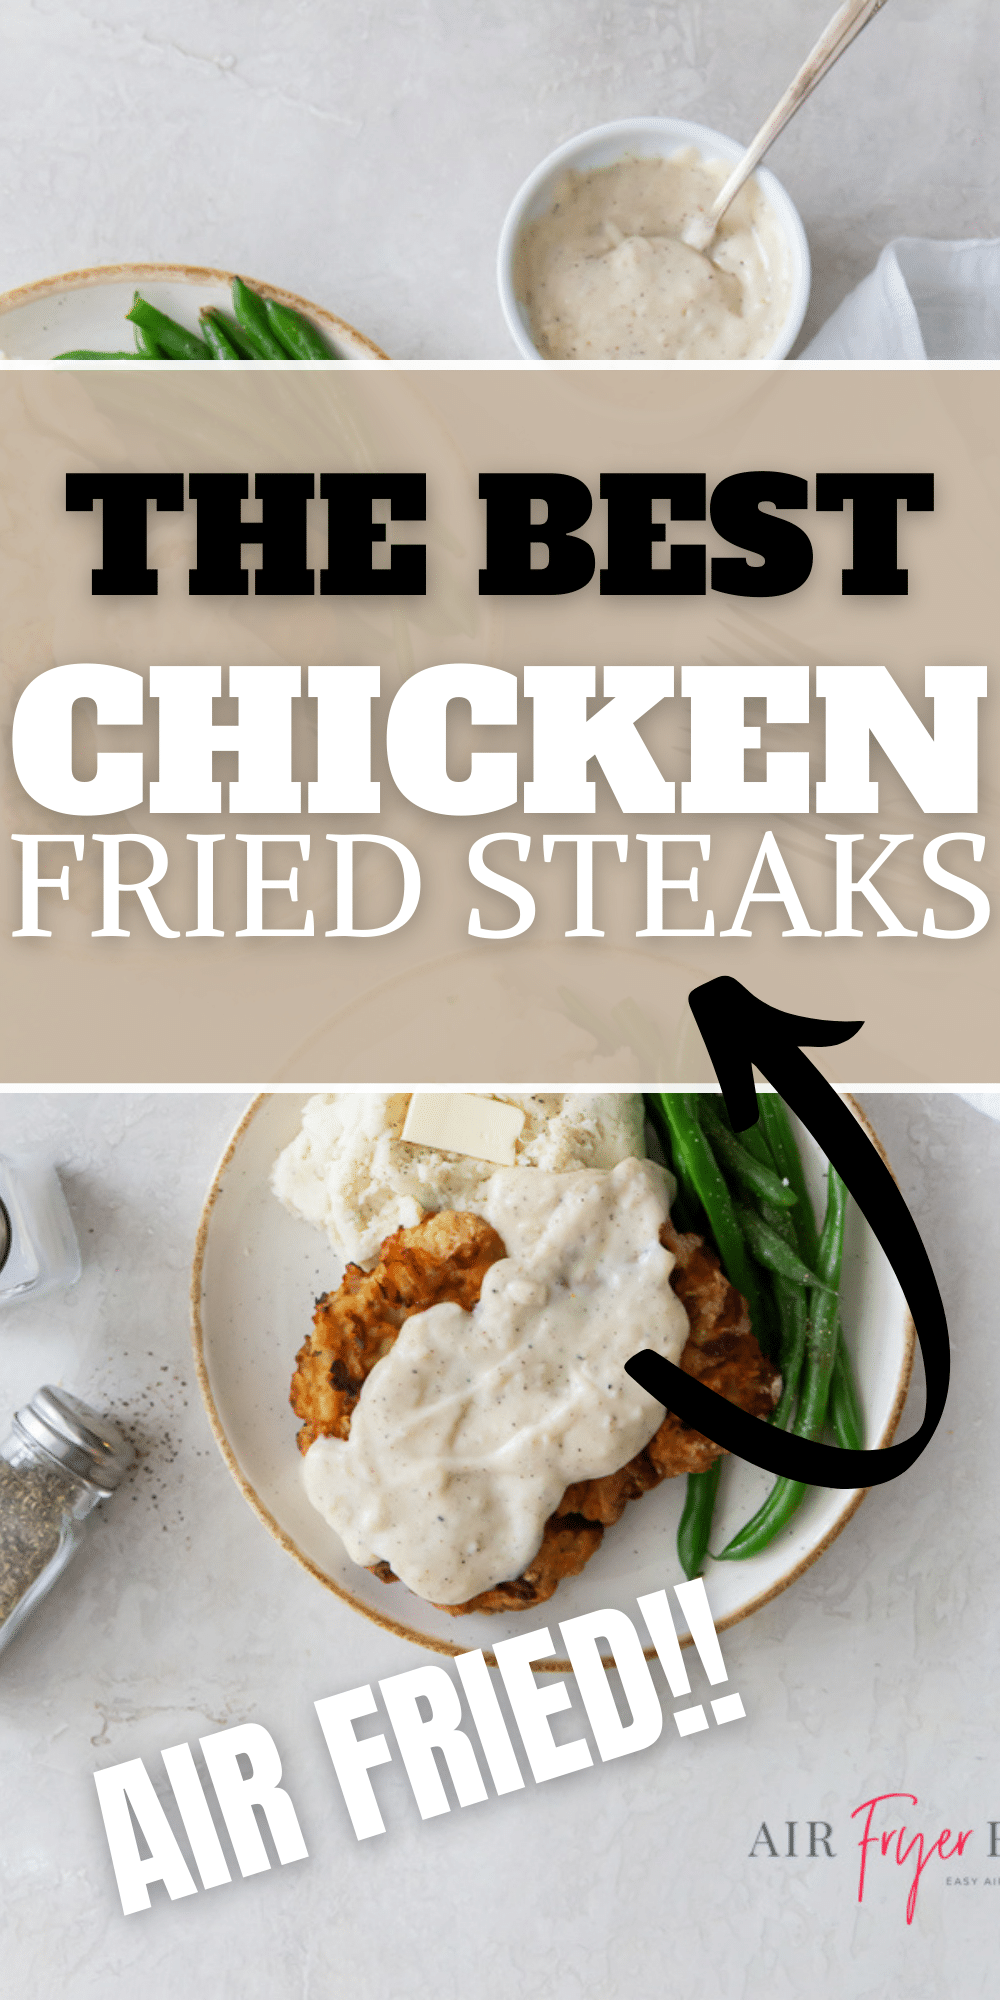 Air Fryer Chicken Fried Steak with a creamy, peppery, country gravy is a traditional Southern dinner, made healthier and with less mess using your favorite kitchen appliance. #airfryersteak #chickenfriedsteak via @vegetarianmamma